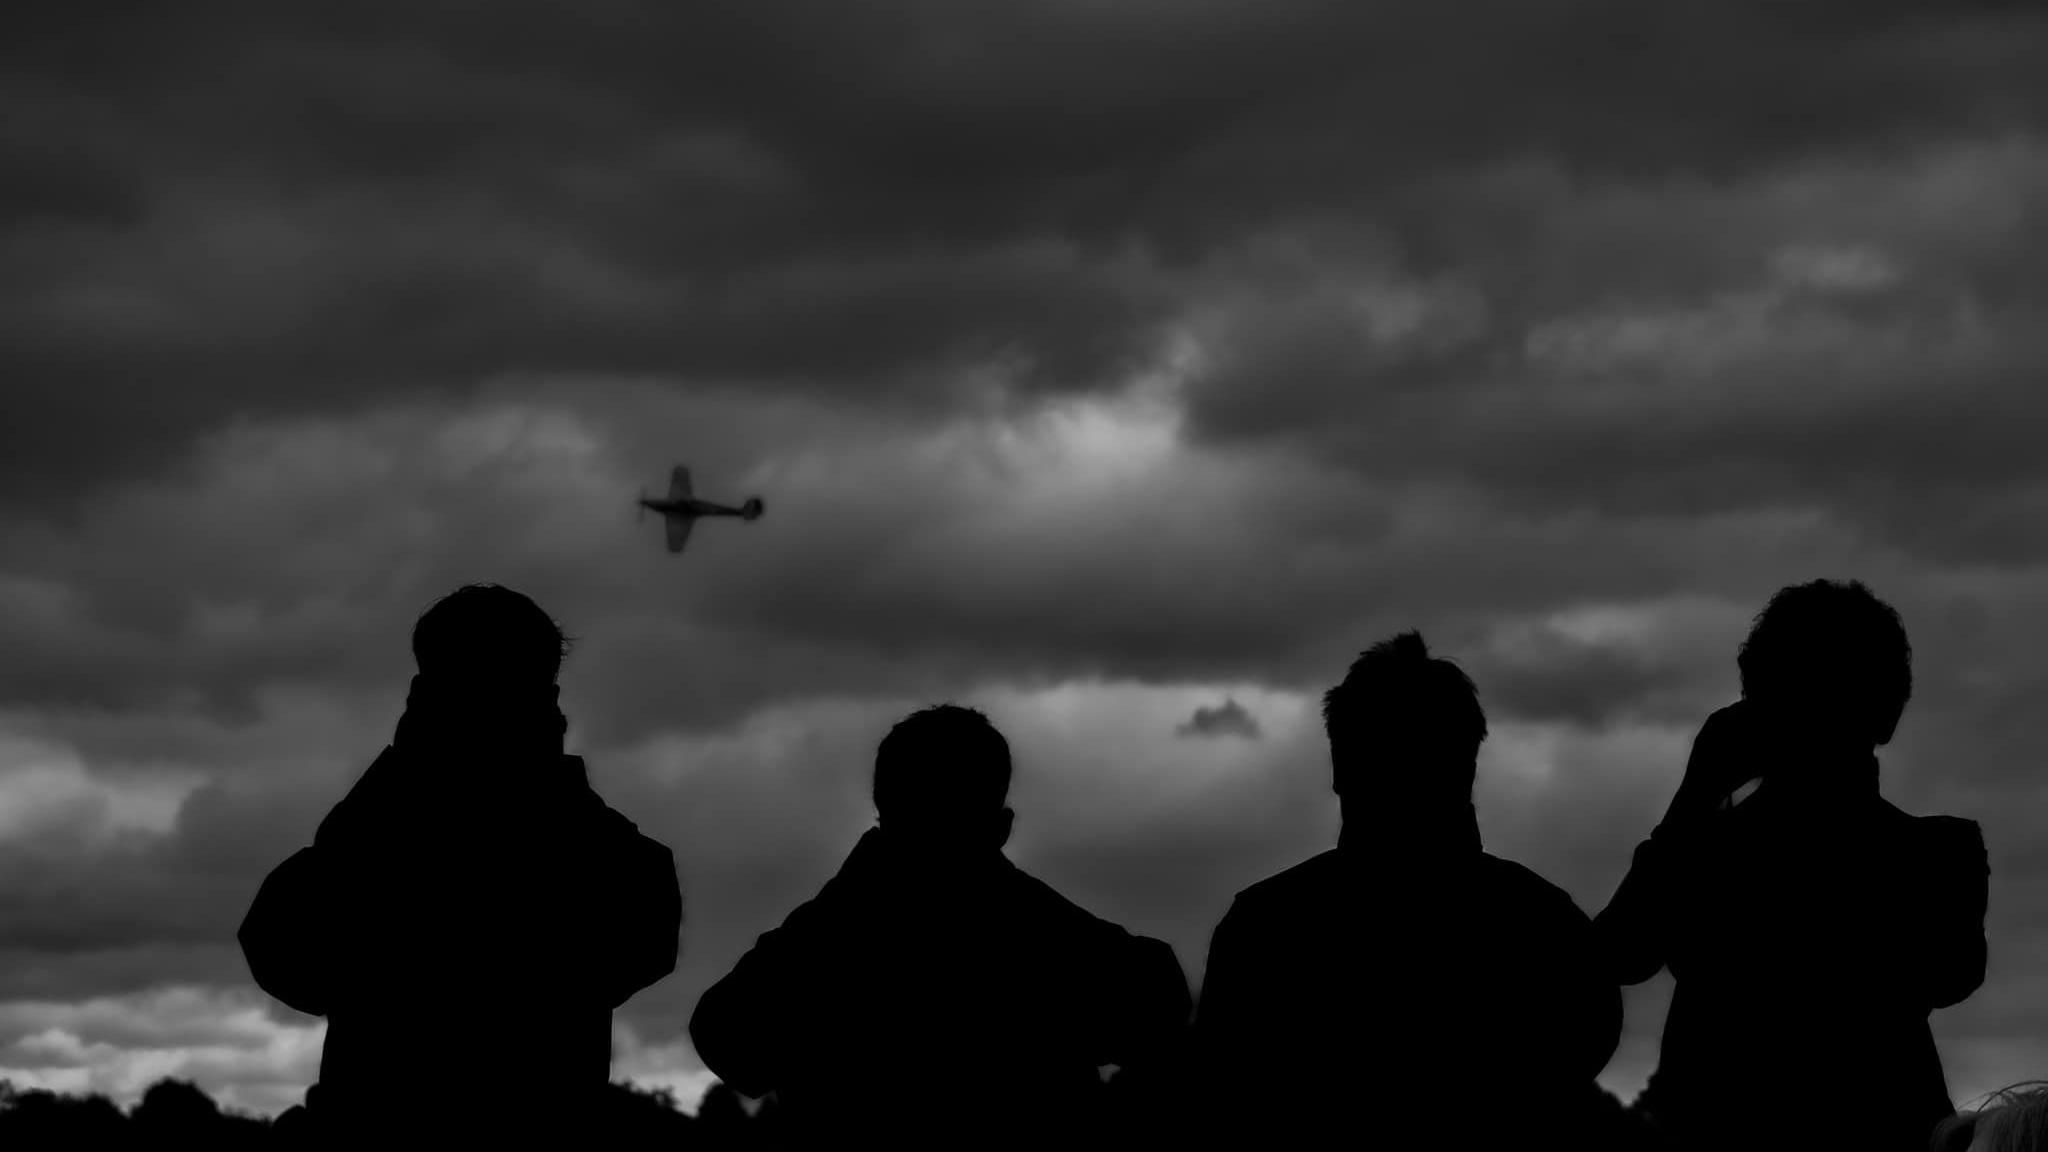 Silhouettes of four people watch the sky, where there is a plane flying in front of them